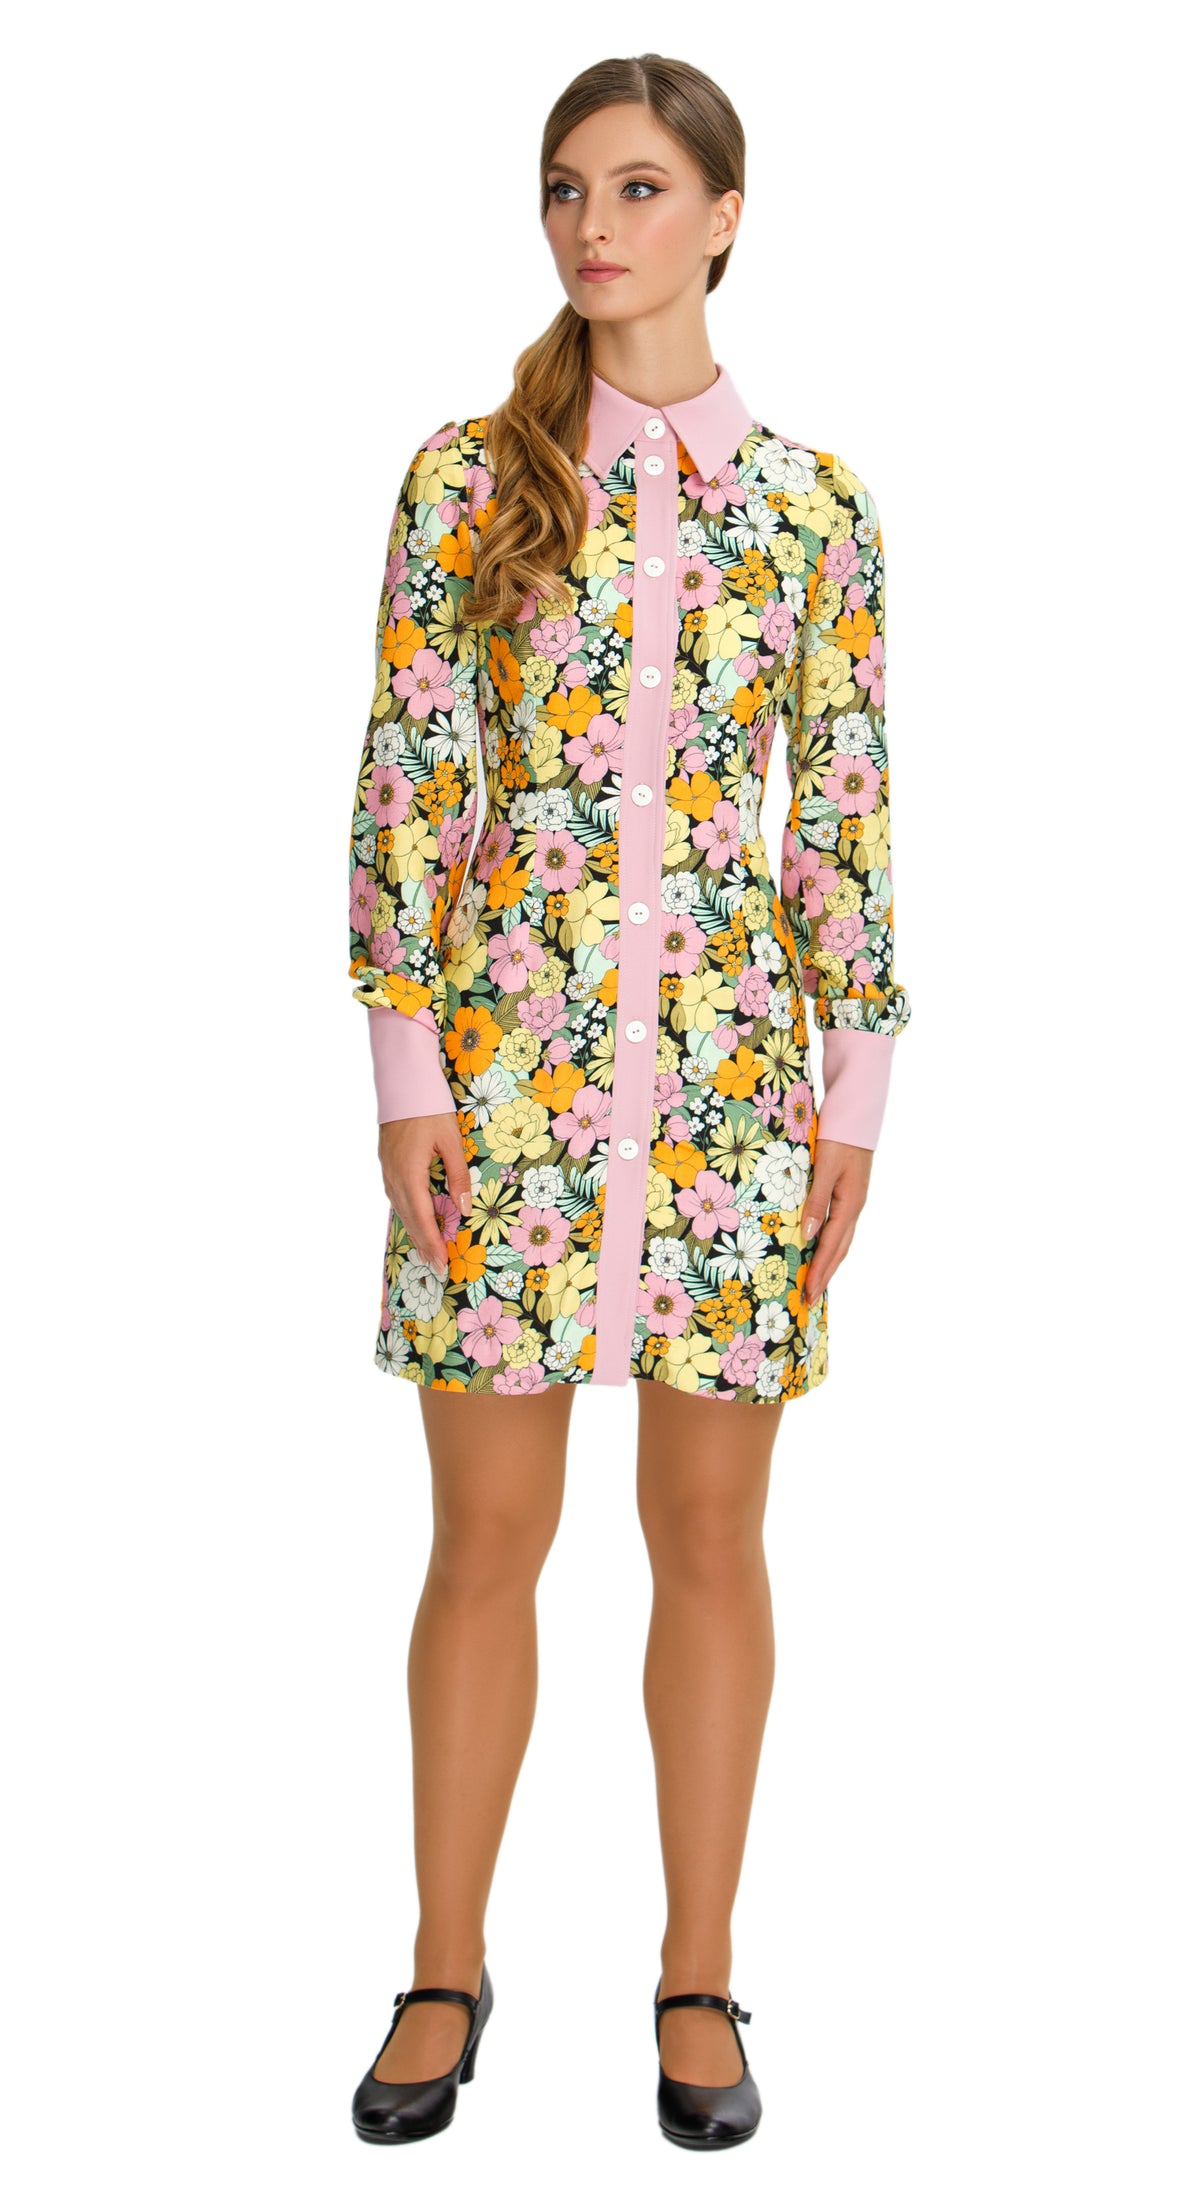 Vibrant Floral  Autumn Shirt Dress; a versatile and delightful addition to your wardrobe. This dress features a vibrant floral pattern that adds a casual elegance to your ensemble, making it perfect for both work and play. The classic pink collar, cuffs, and button down detailing provide a charming contrast against the floral backdrop.